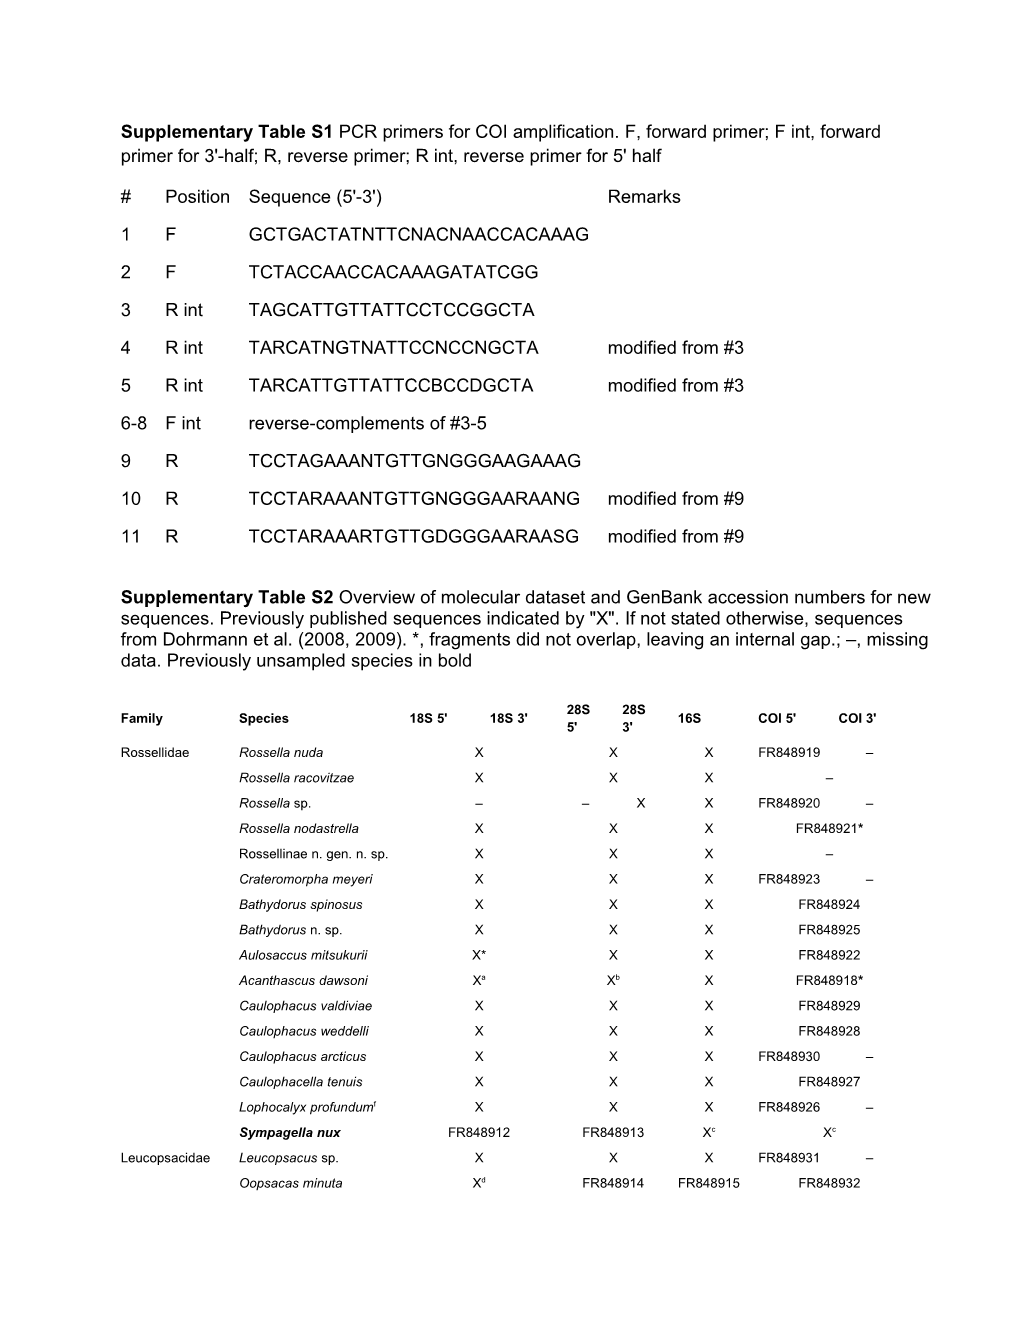 Supplementary Table S1 PCR Primers for COI Amplification. F, Forward Primer; F Int, Forward